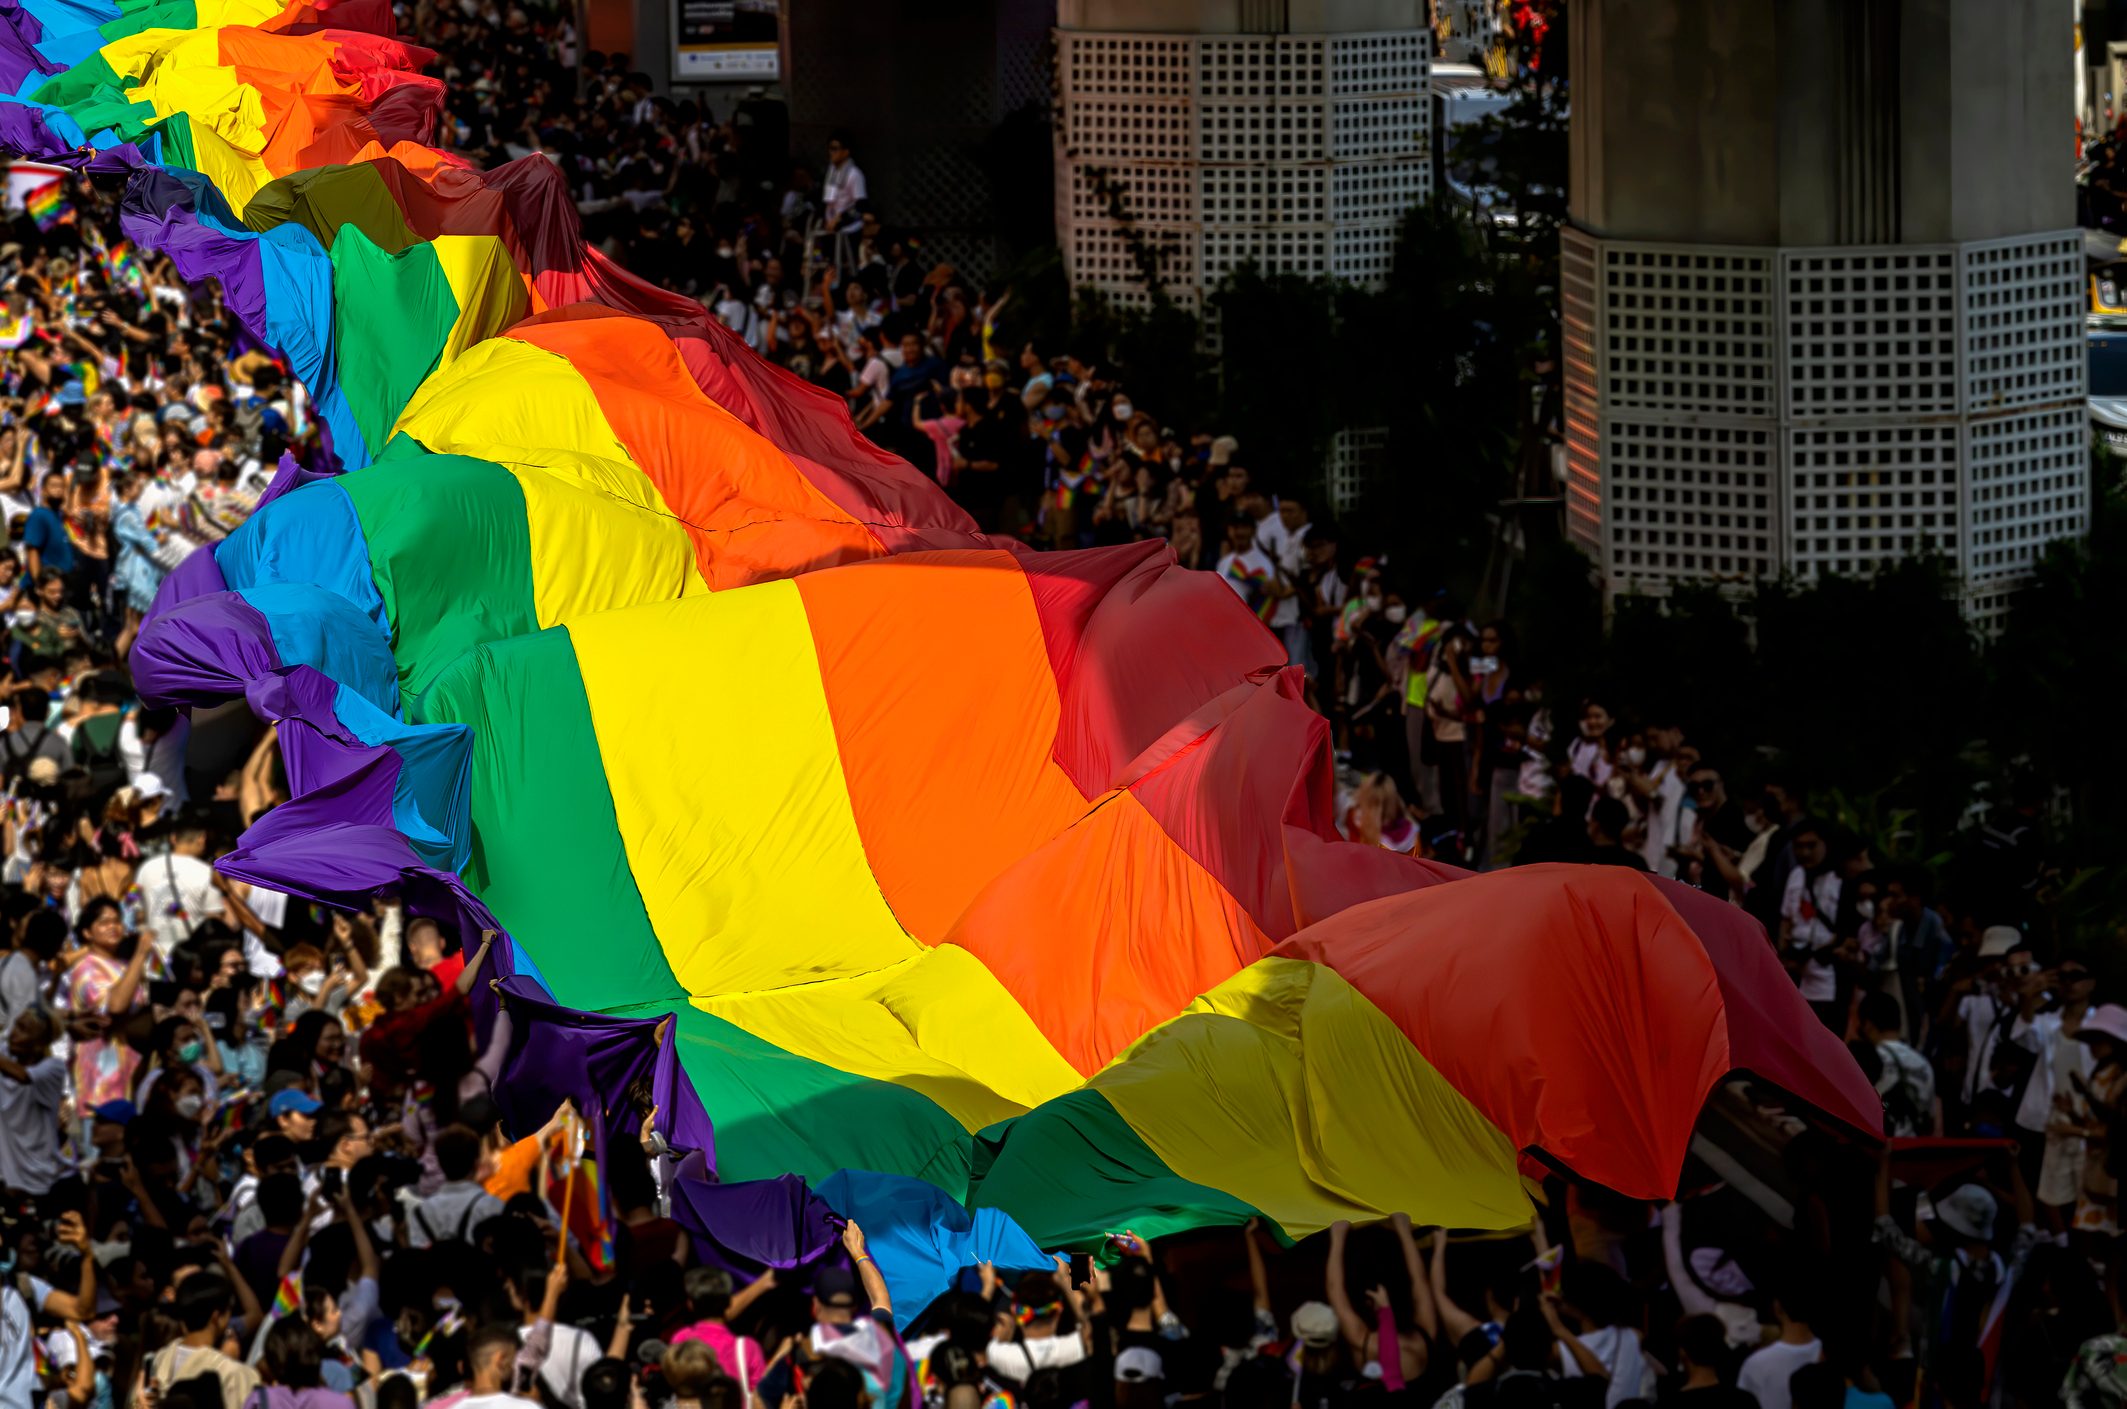 Group of people celebrating Pride Month and Parade-People marching with the rainbow LGBTQI flag